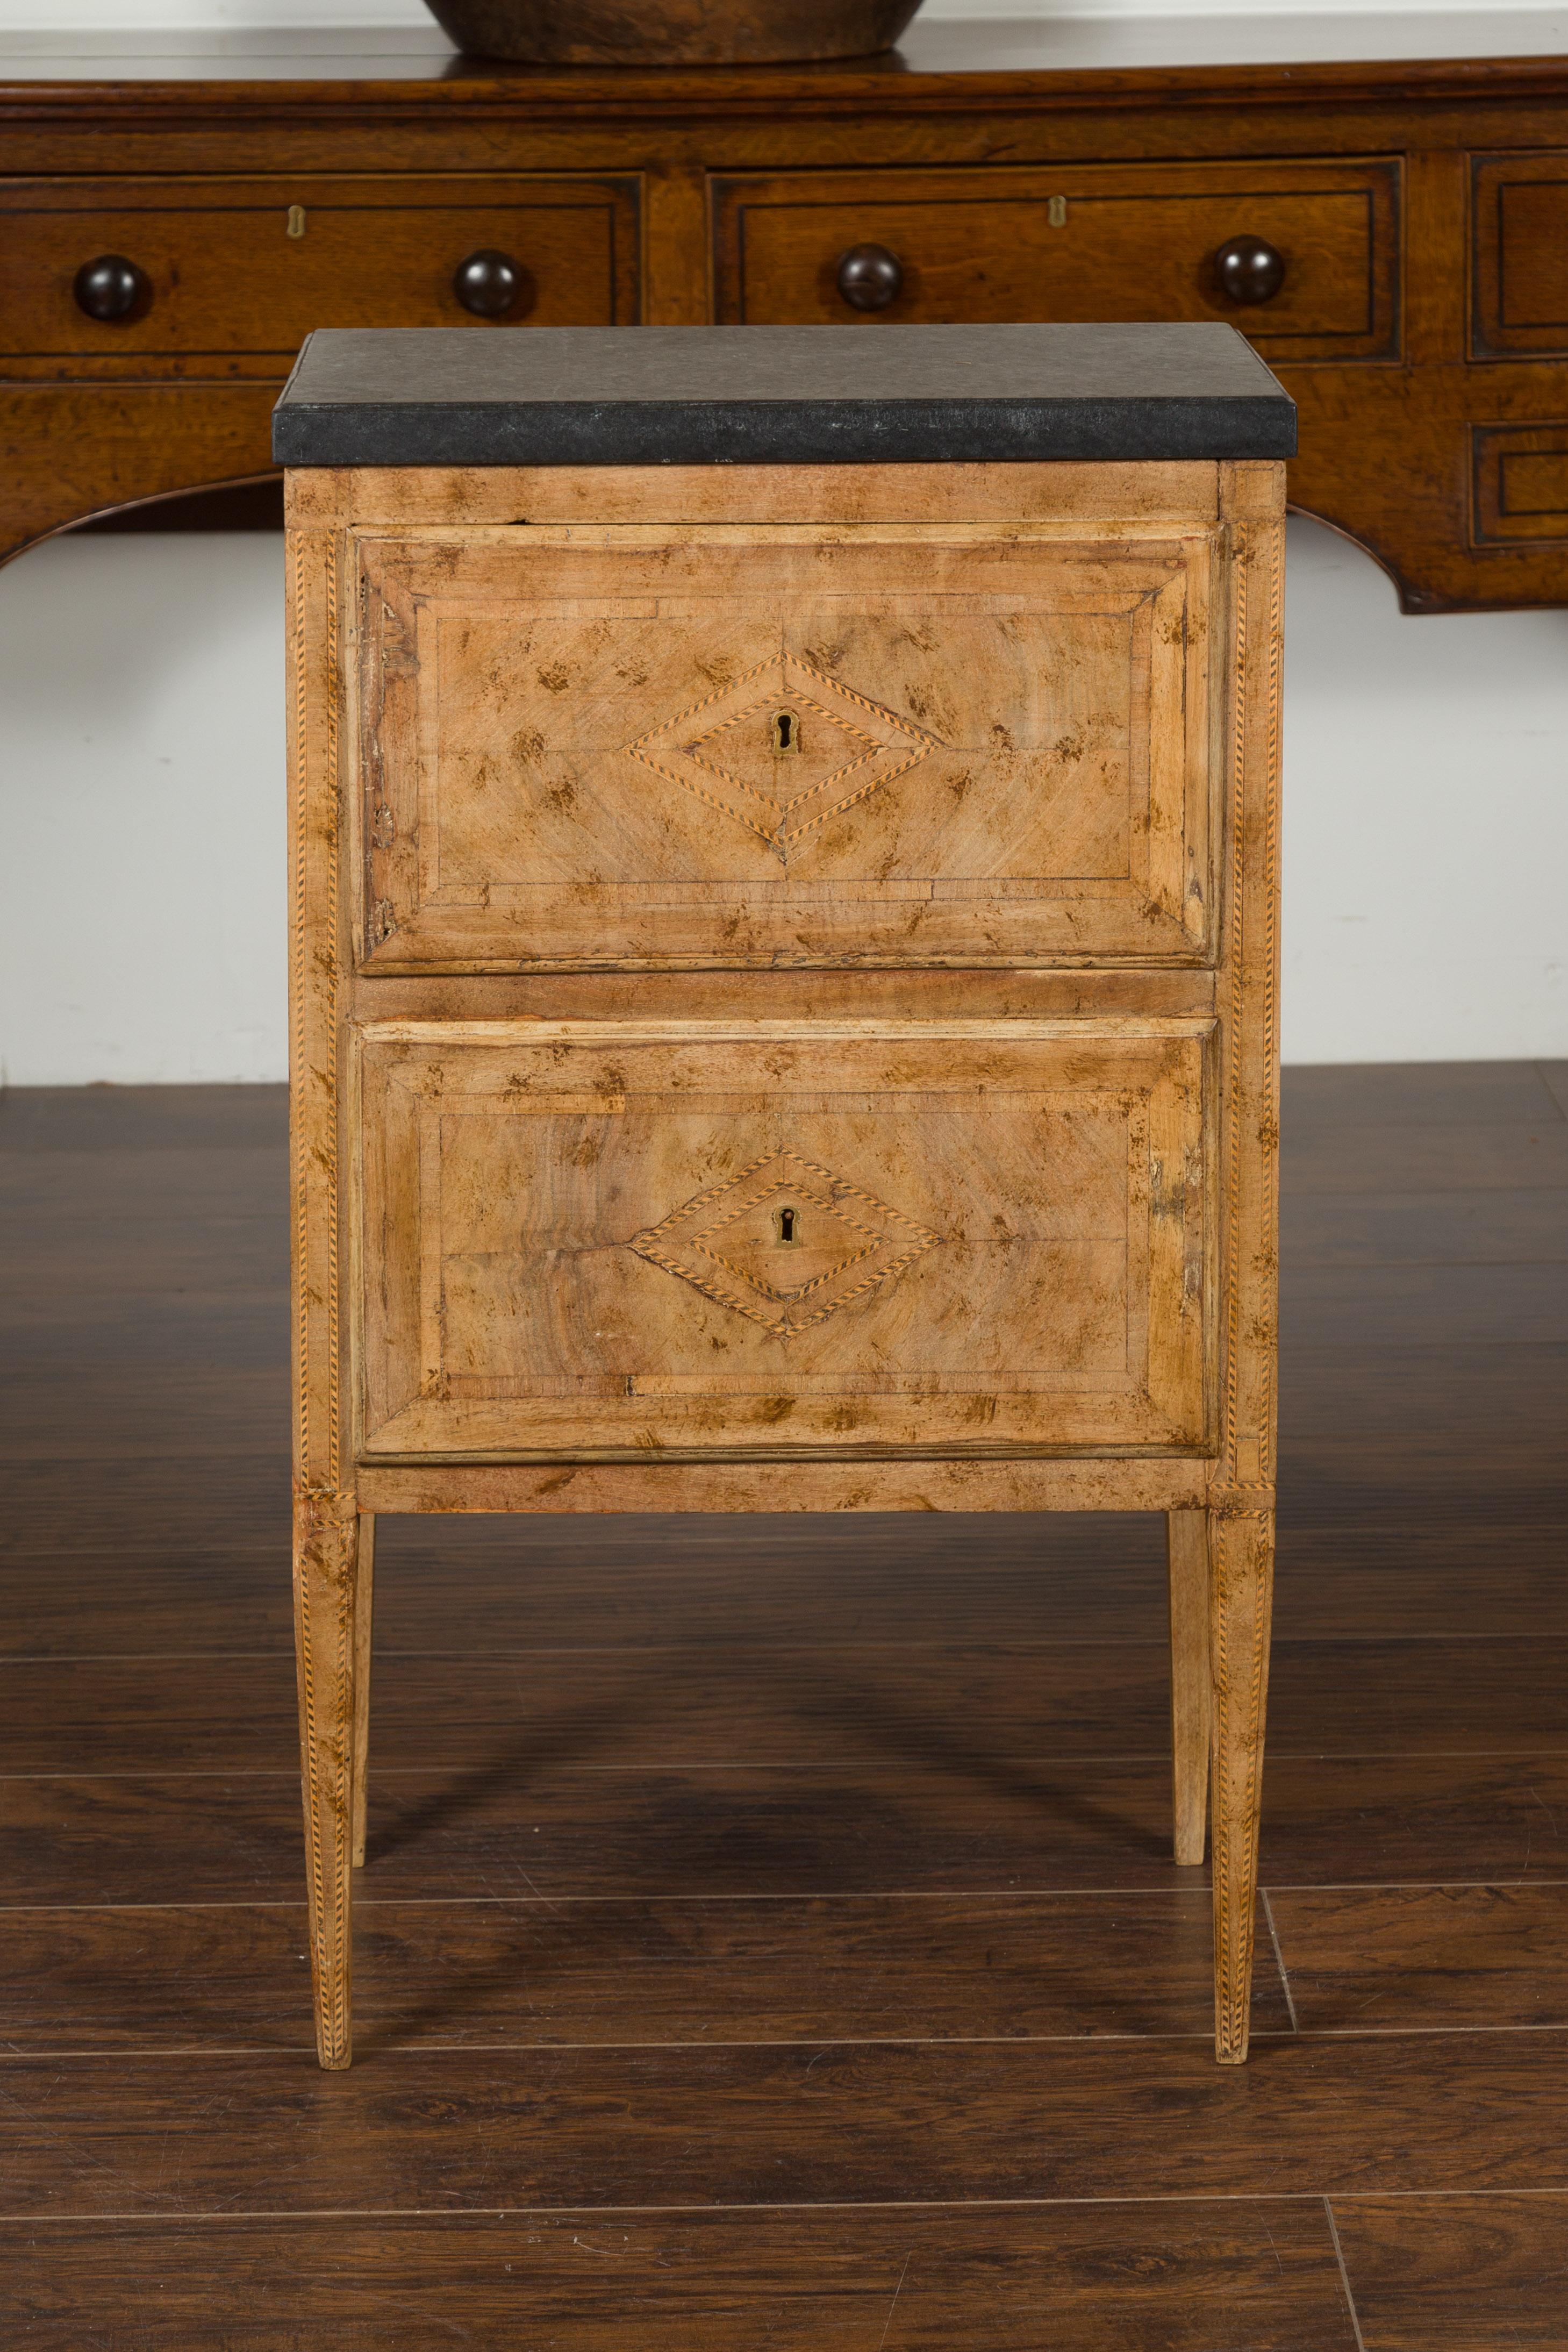 A petite Italian neoclassical period bleached burl wood two-drawer commode from the early 19th century, with dark grey / black marble top and striped banding. Created in Italy during the early years of the 19th century, this petite commode features